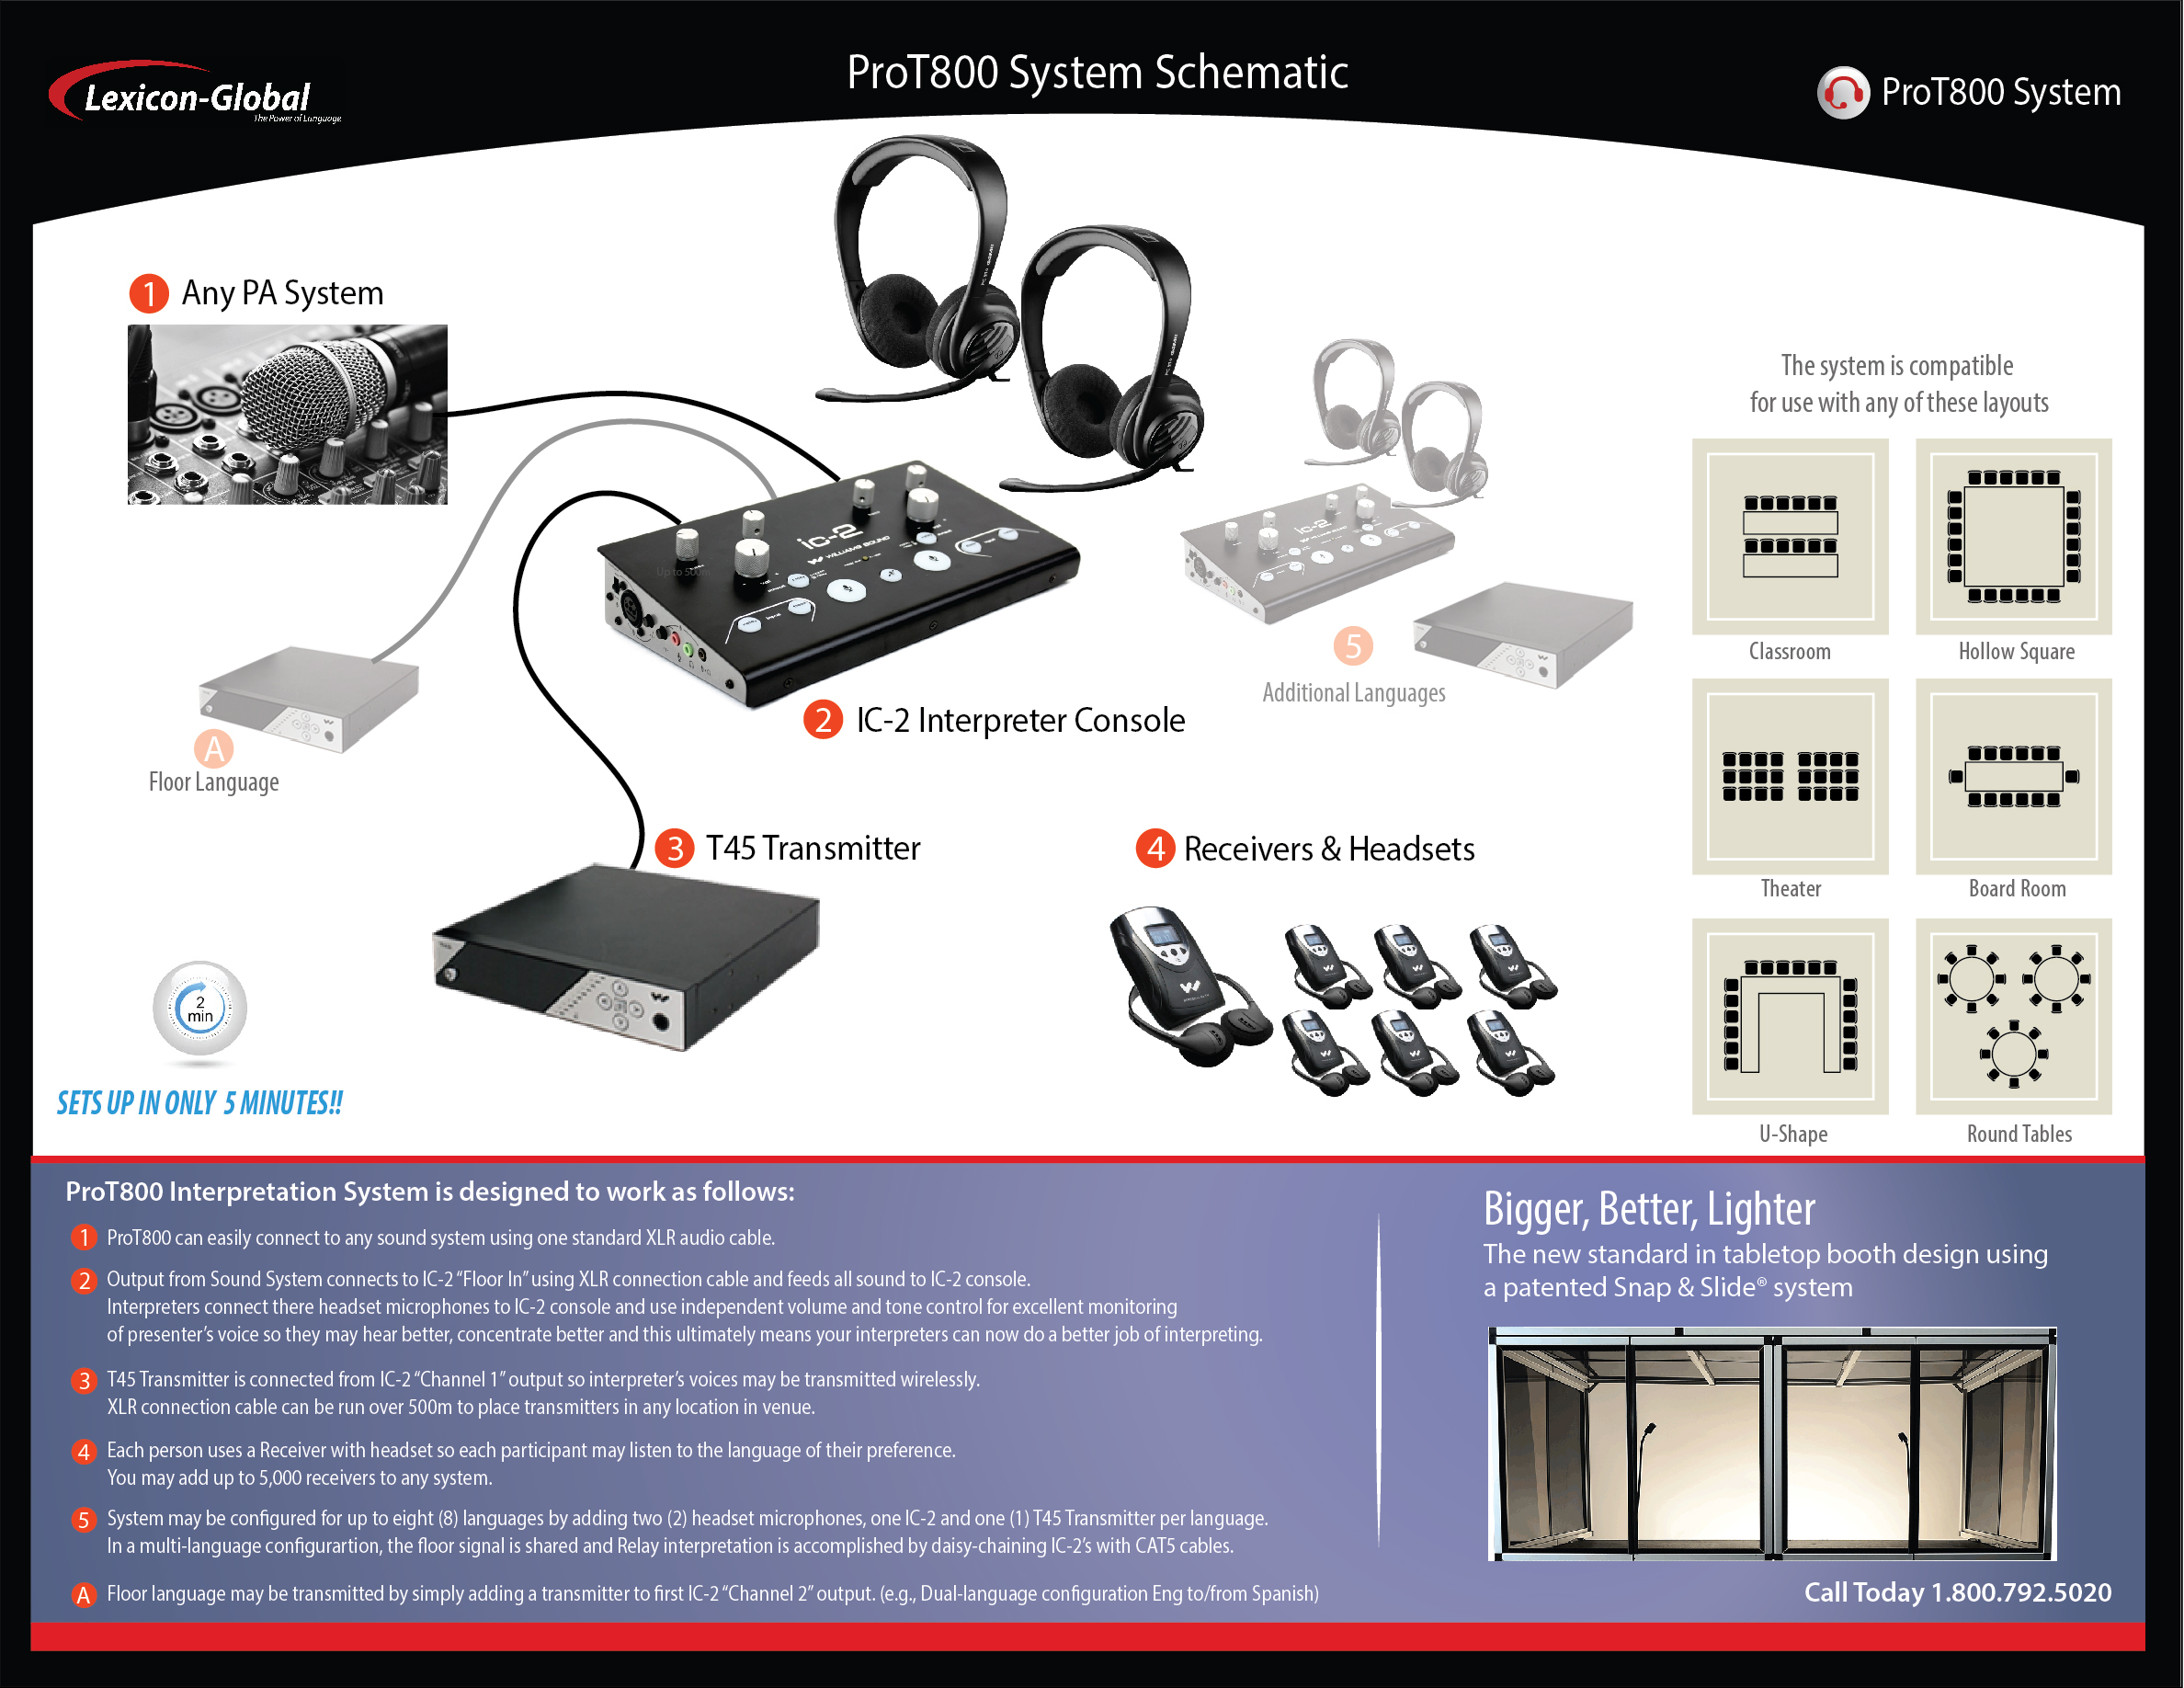 Max simultaneous 1 simultaneous. Simultaneous interpretation and Equipment. Simultaneous translation Types. Simultaneous interpretation System Bosch. Lexicon Sound System.